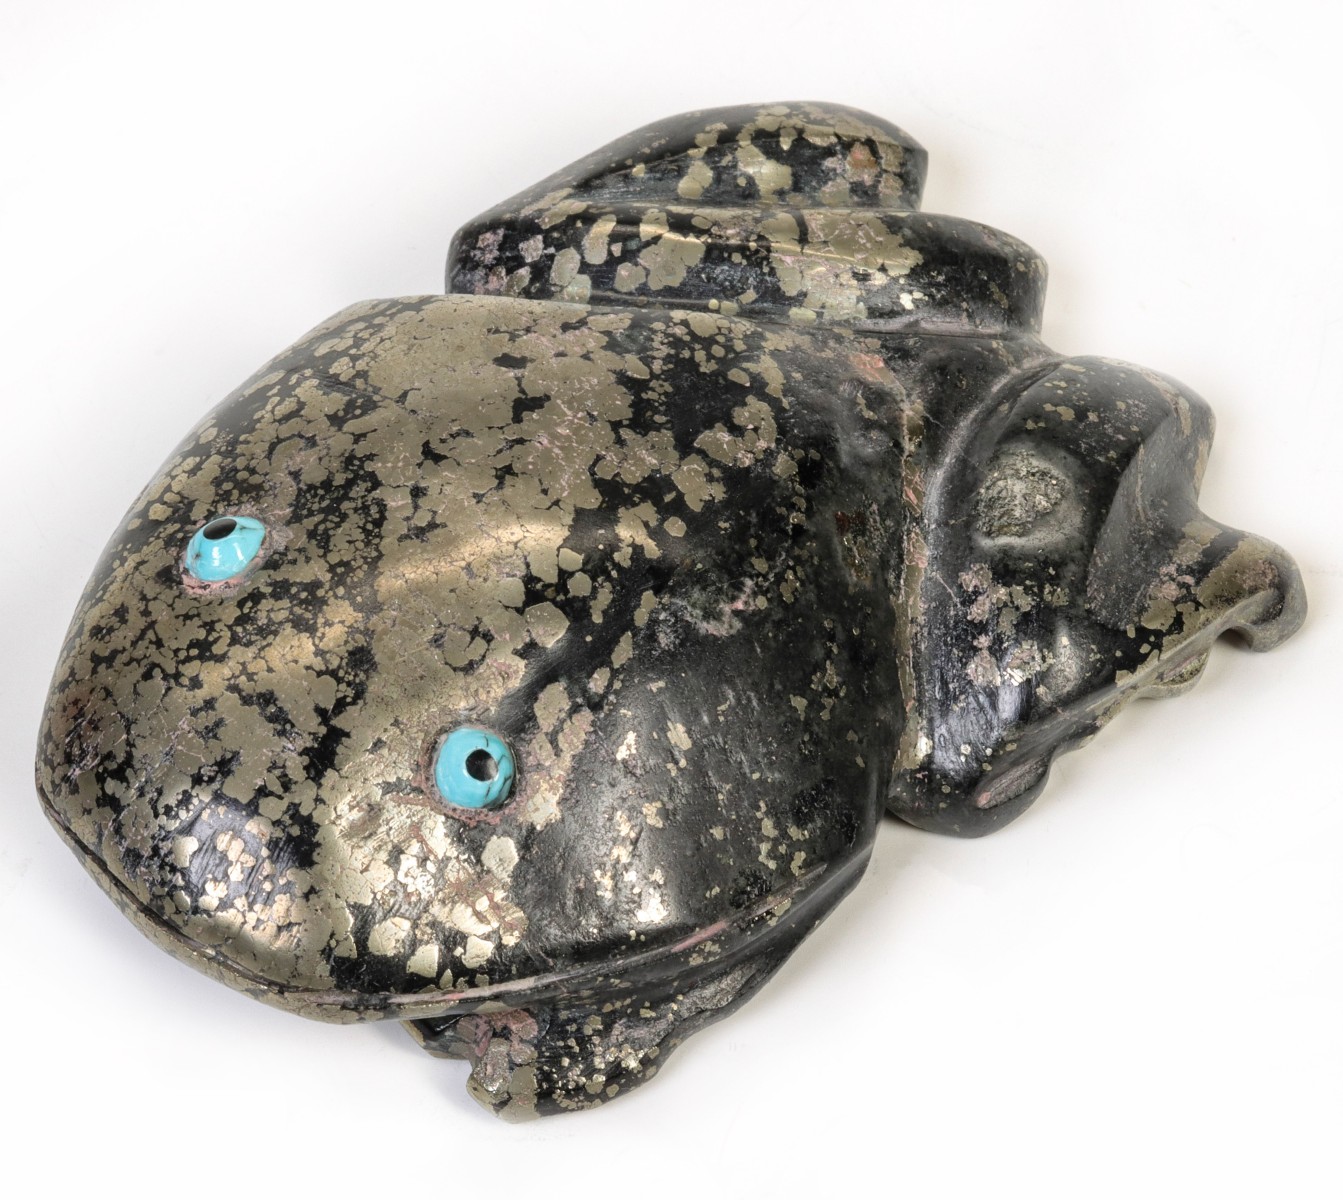 AN ARTIST SIGNED NATIVE AMERICAN CARVED HEMATITE FROG